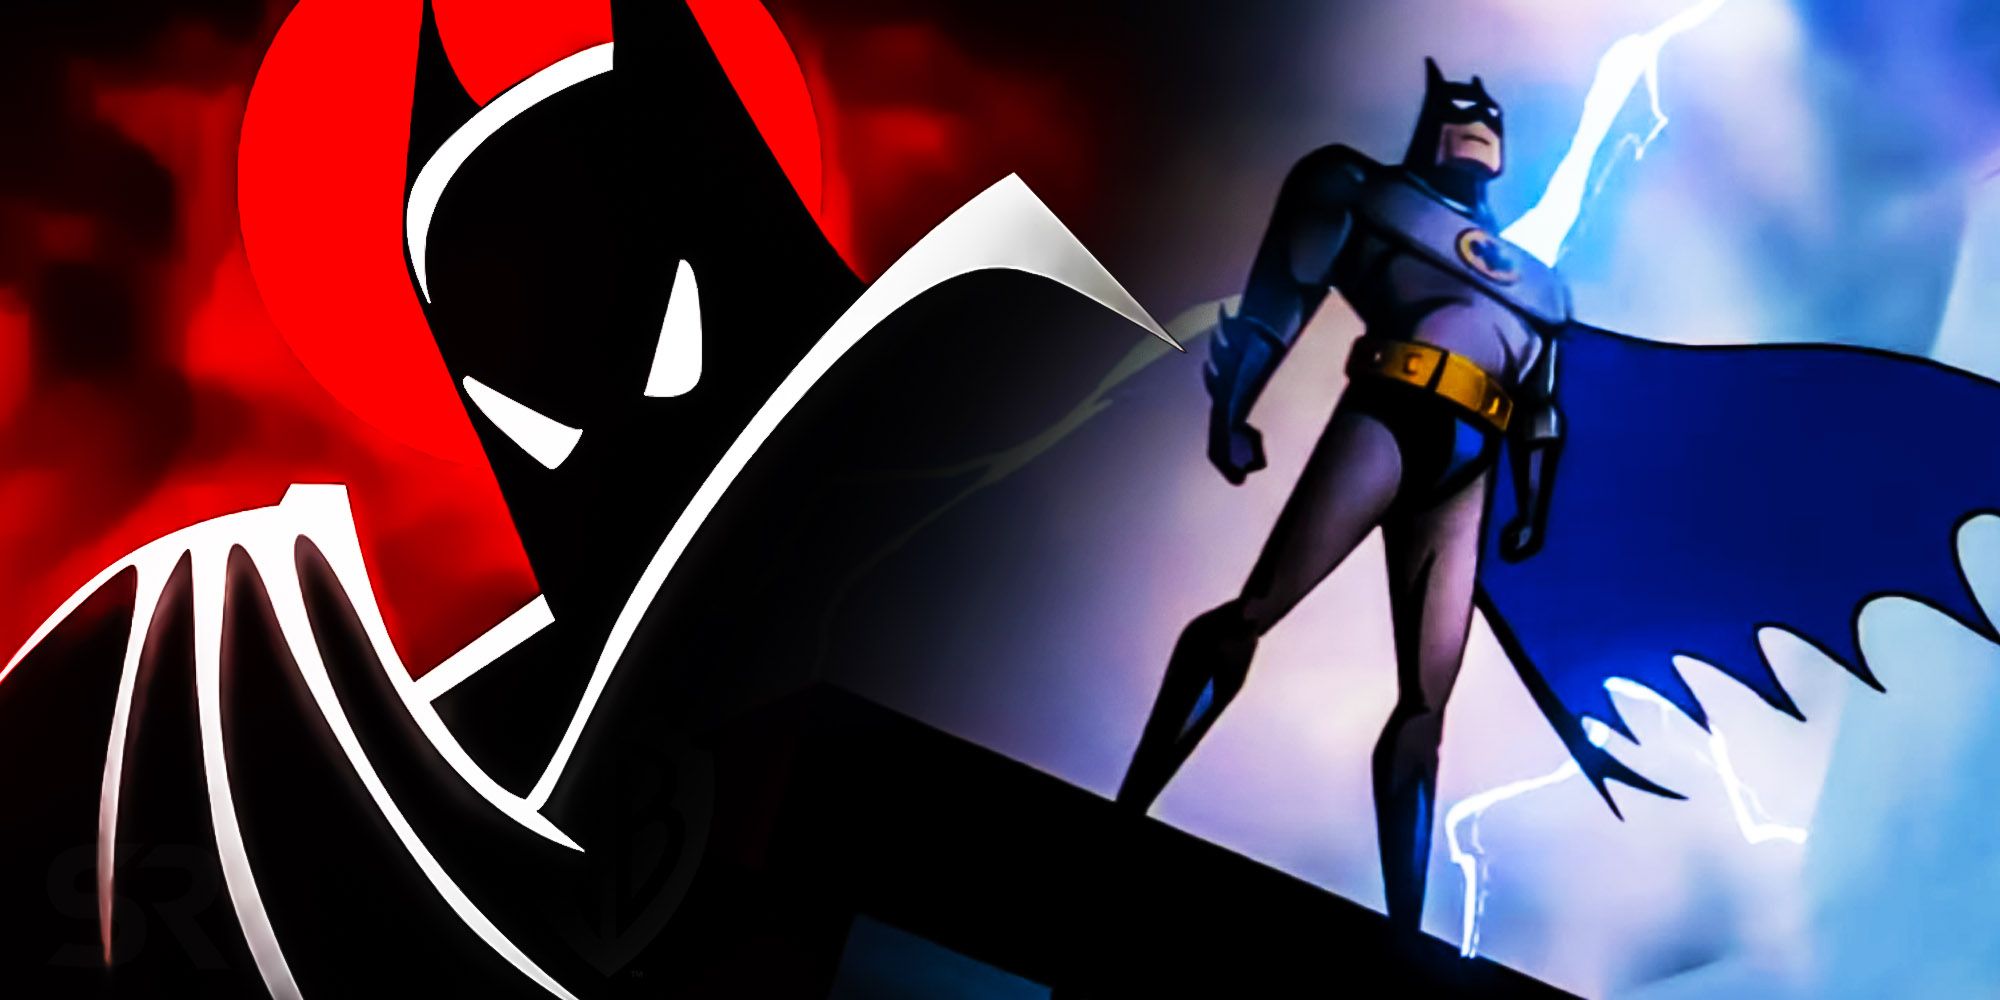 Batman the animated series logo and shot from the introduction